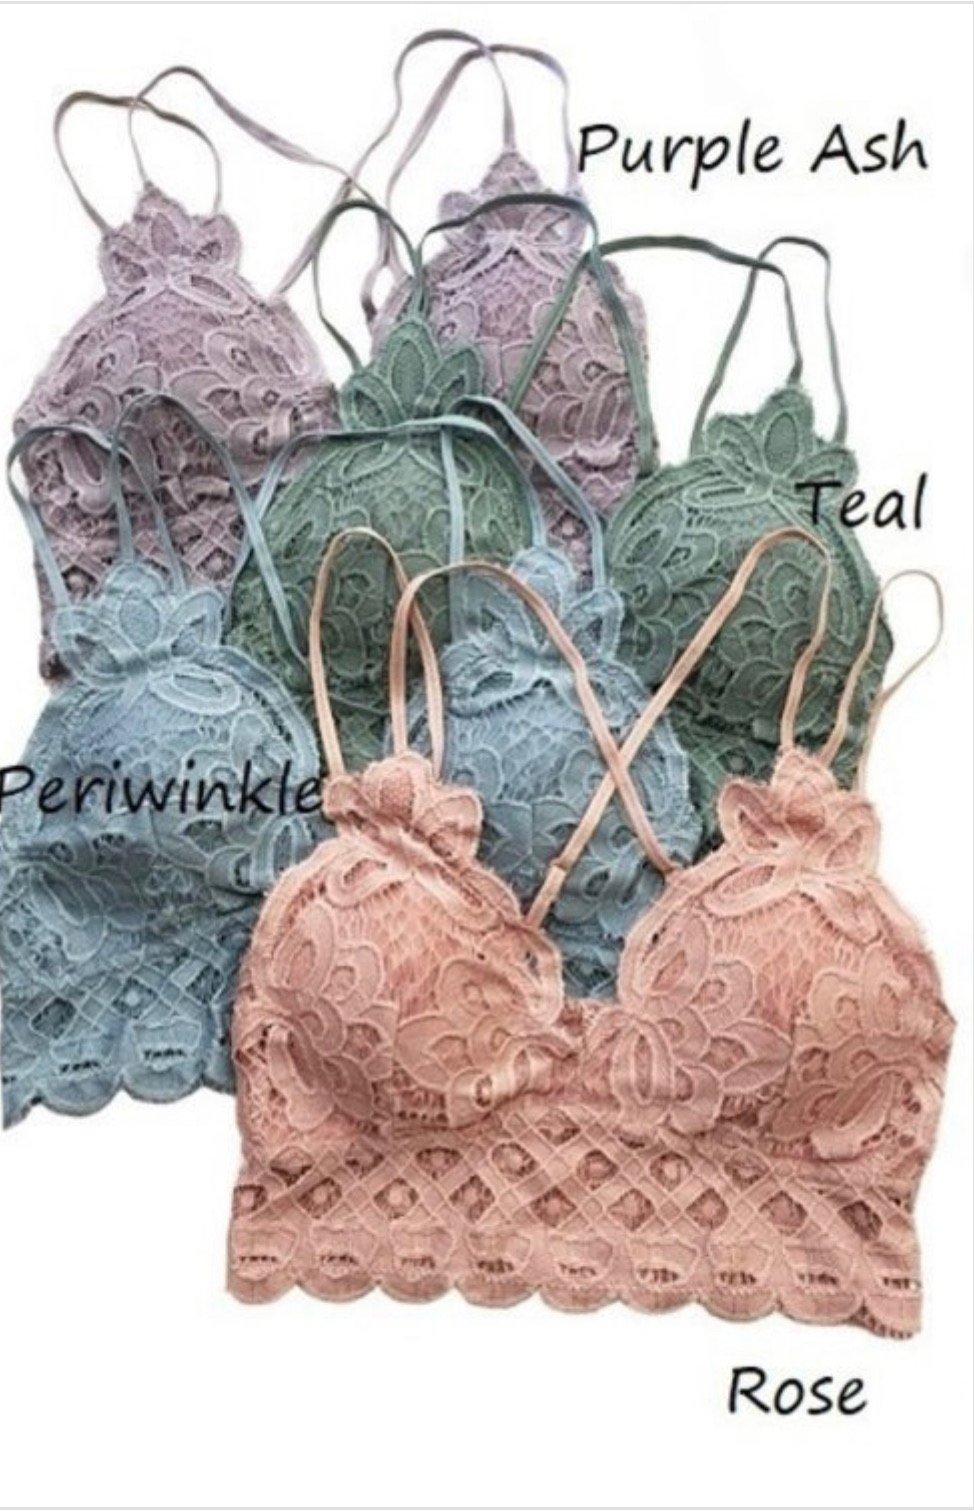 Image of Lace Bralettes with pads 